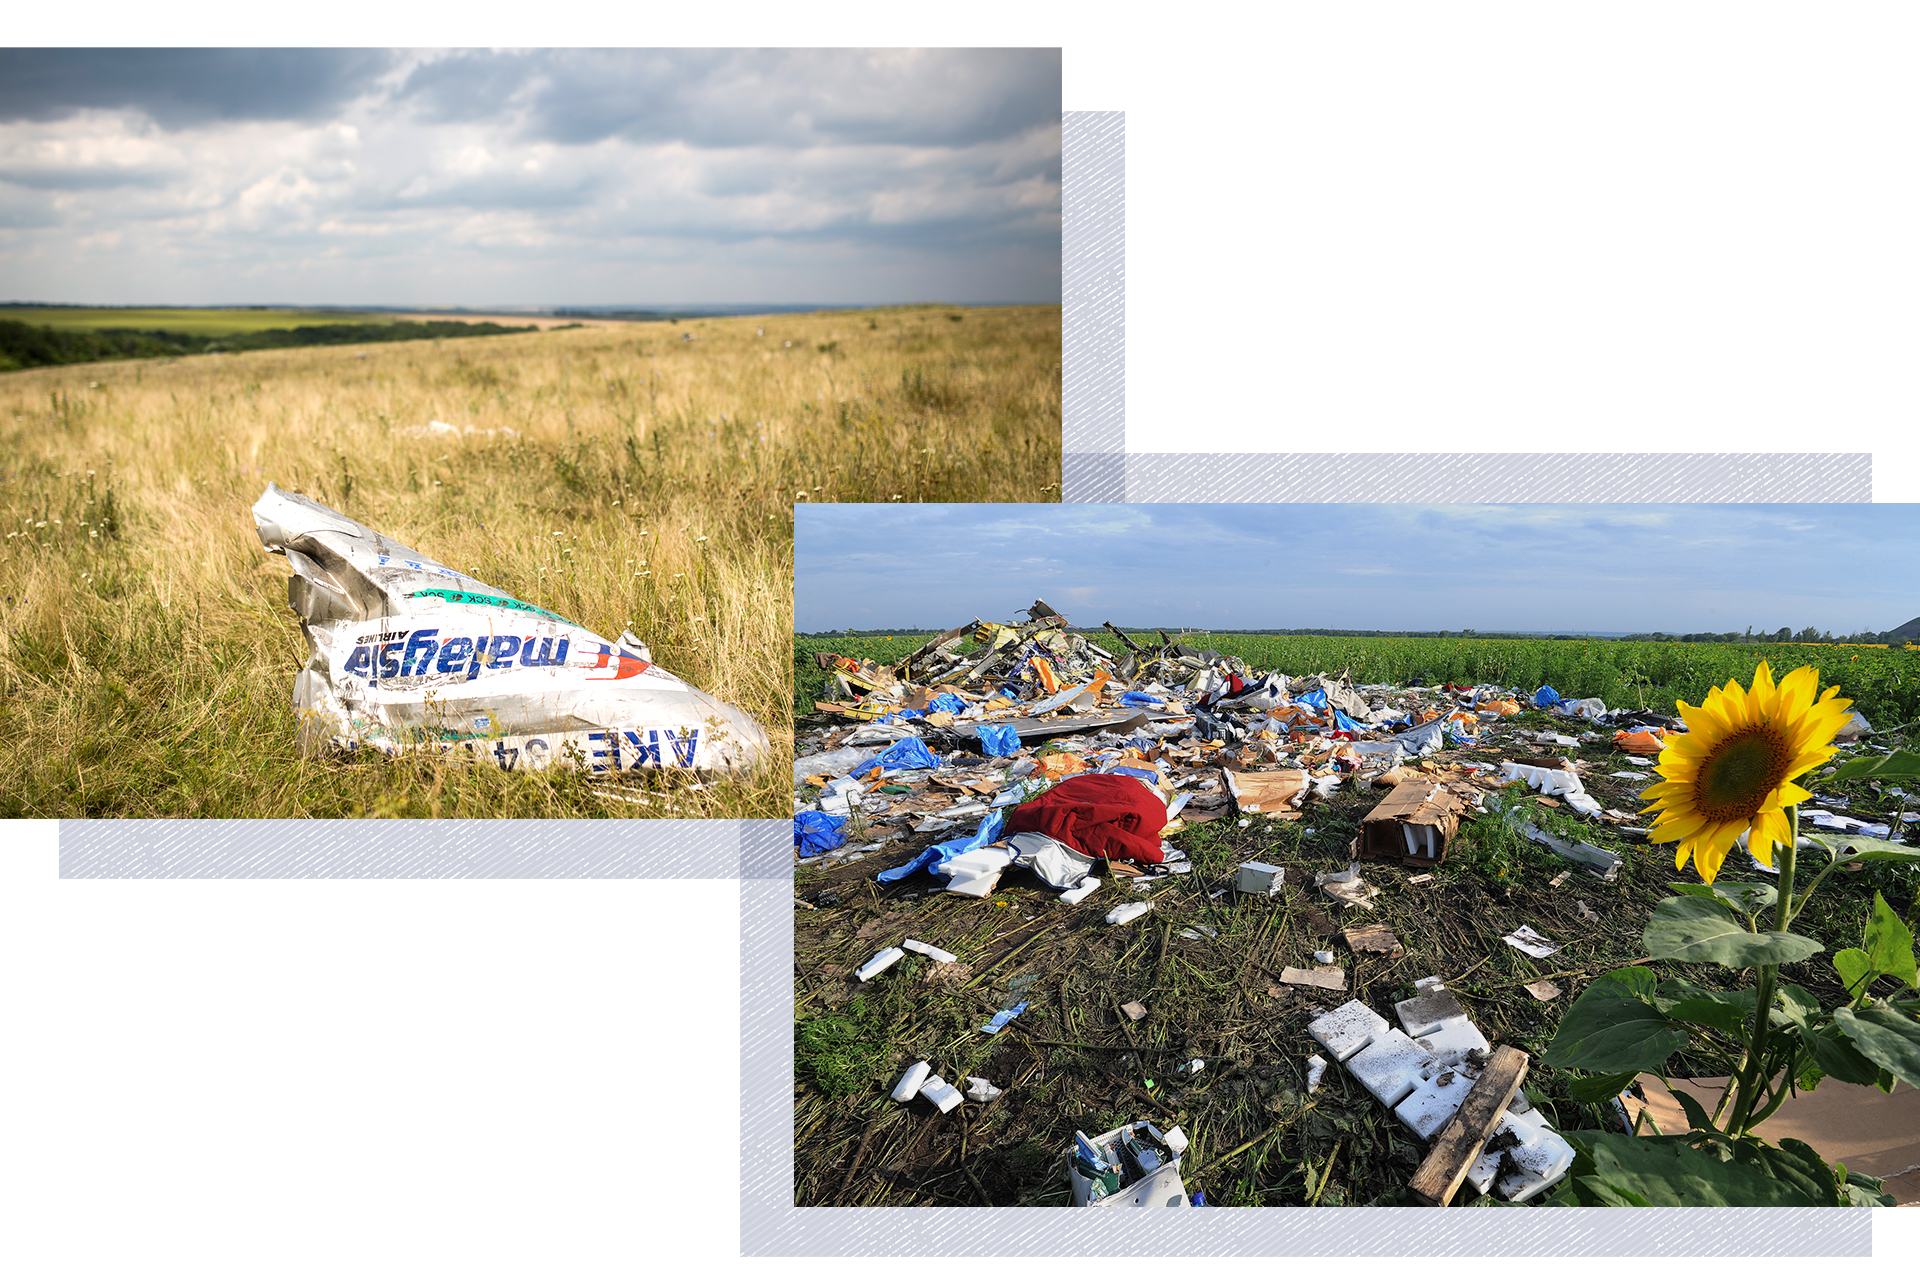 An image of wreckage from a Malaysia Airlines plane in a field beside another image of debris and a sunflower.